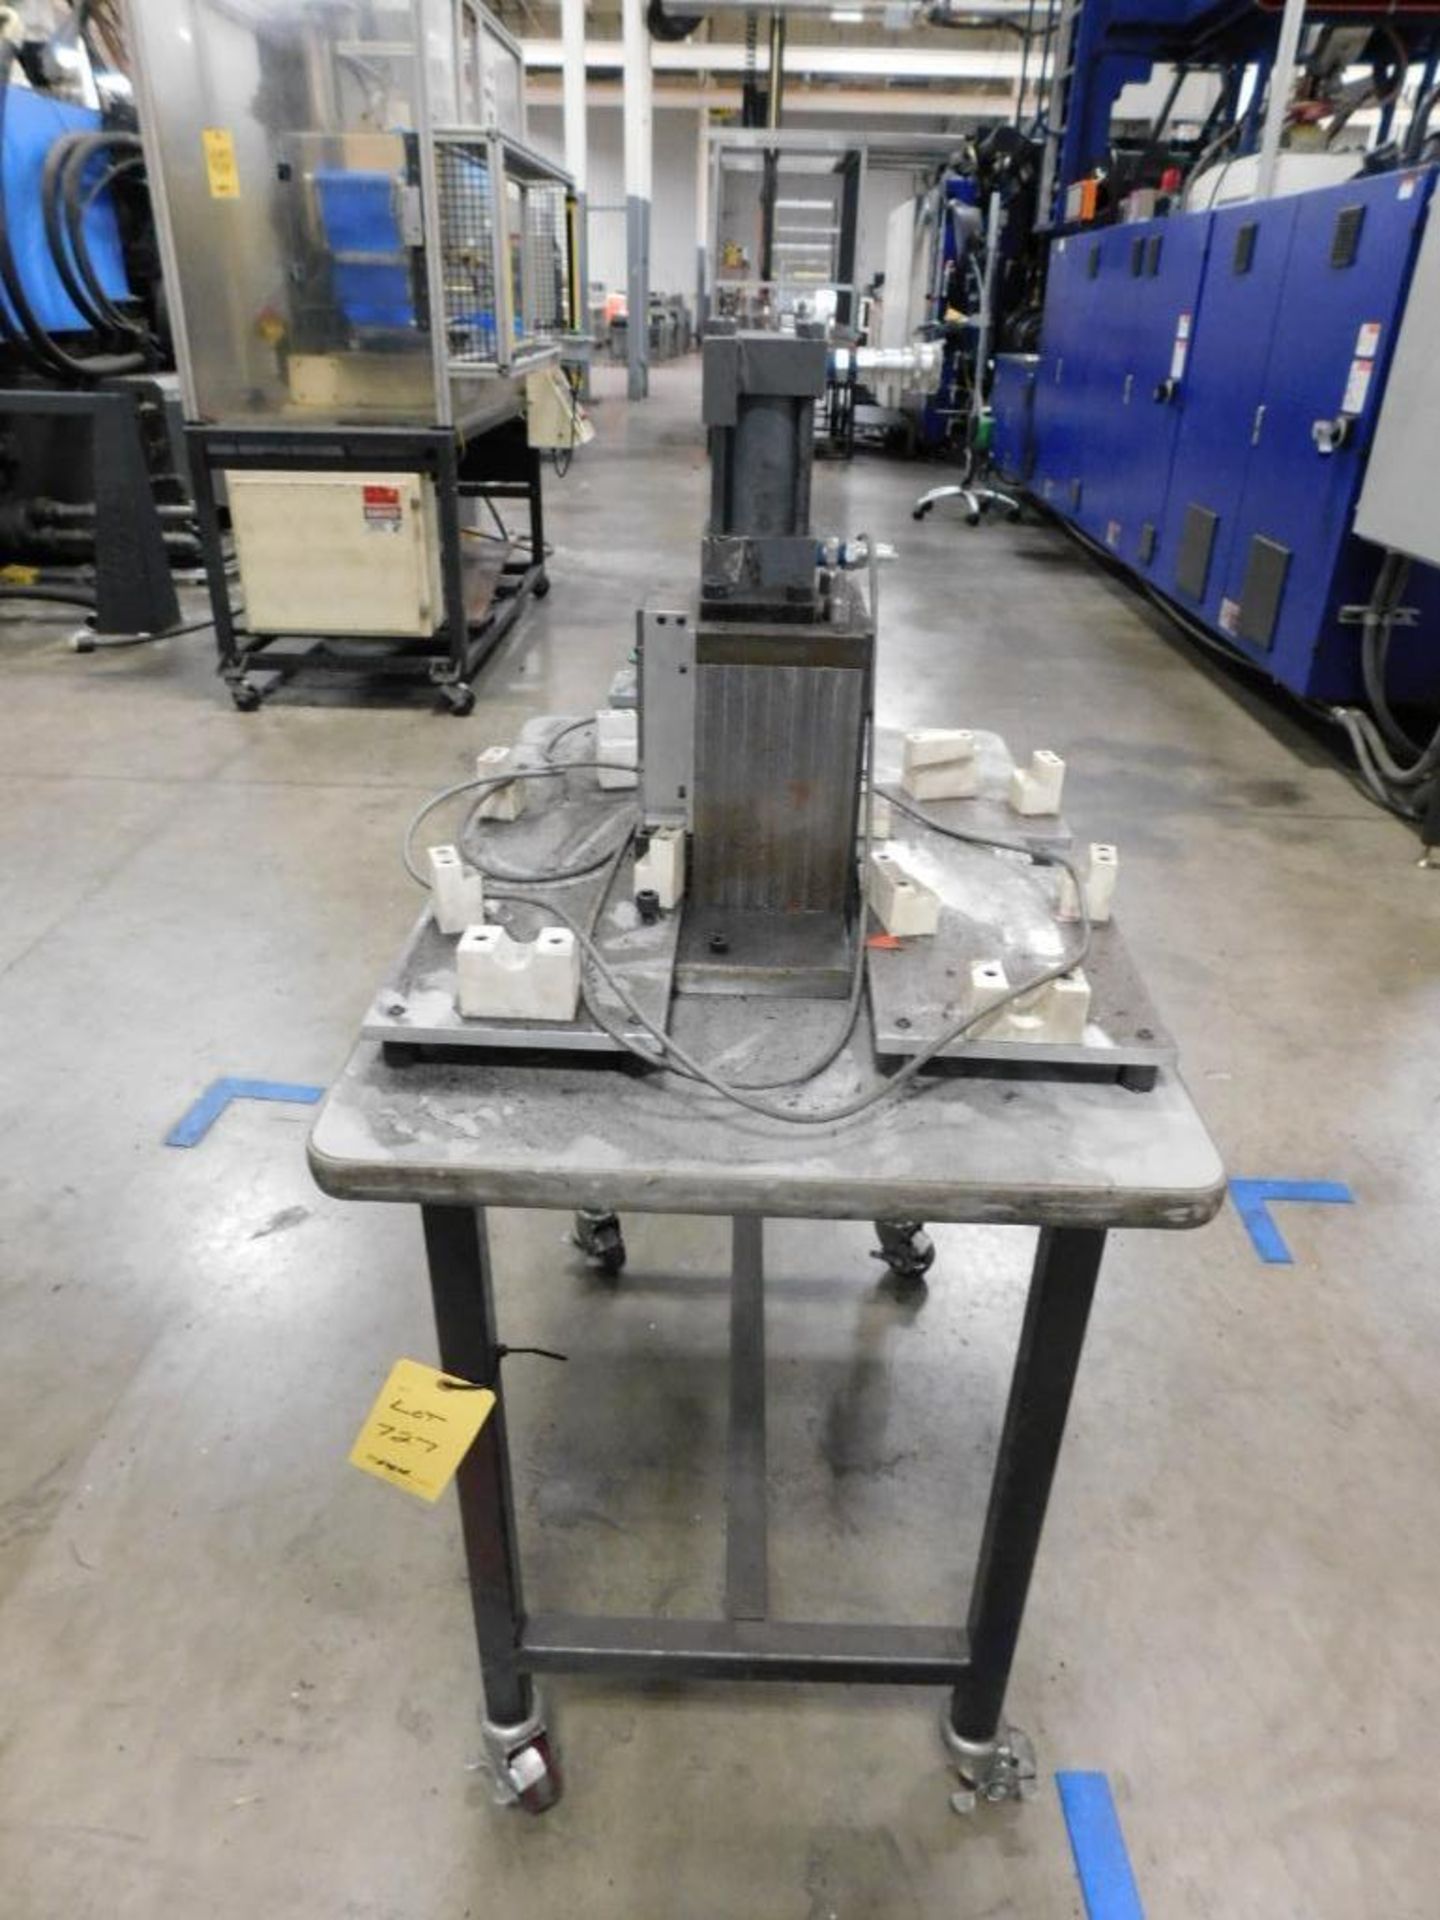 LOT: (8) Work Stations, (2) Punch Presses, (2) Drying Stations, Drilling Station, Glue Station, etc. - Image 5 of 16